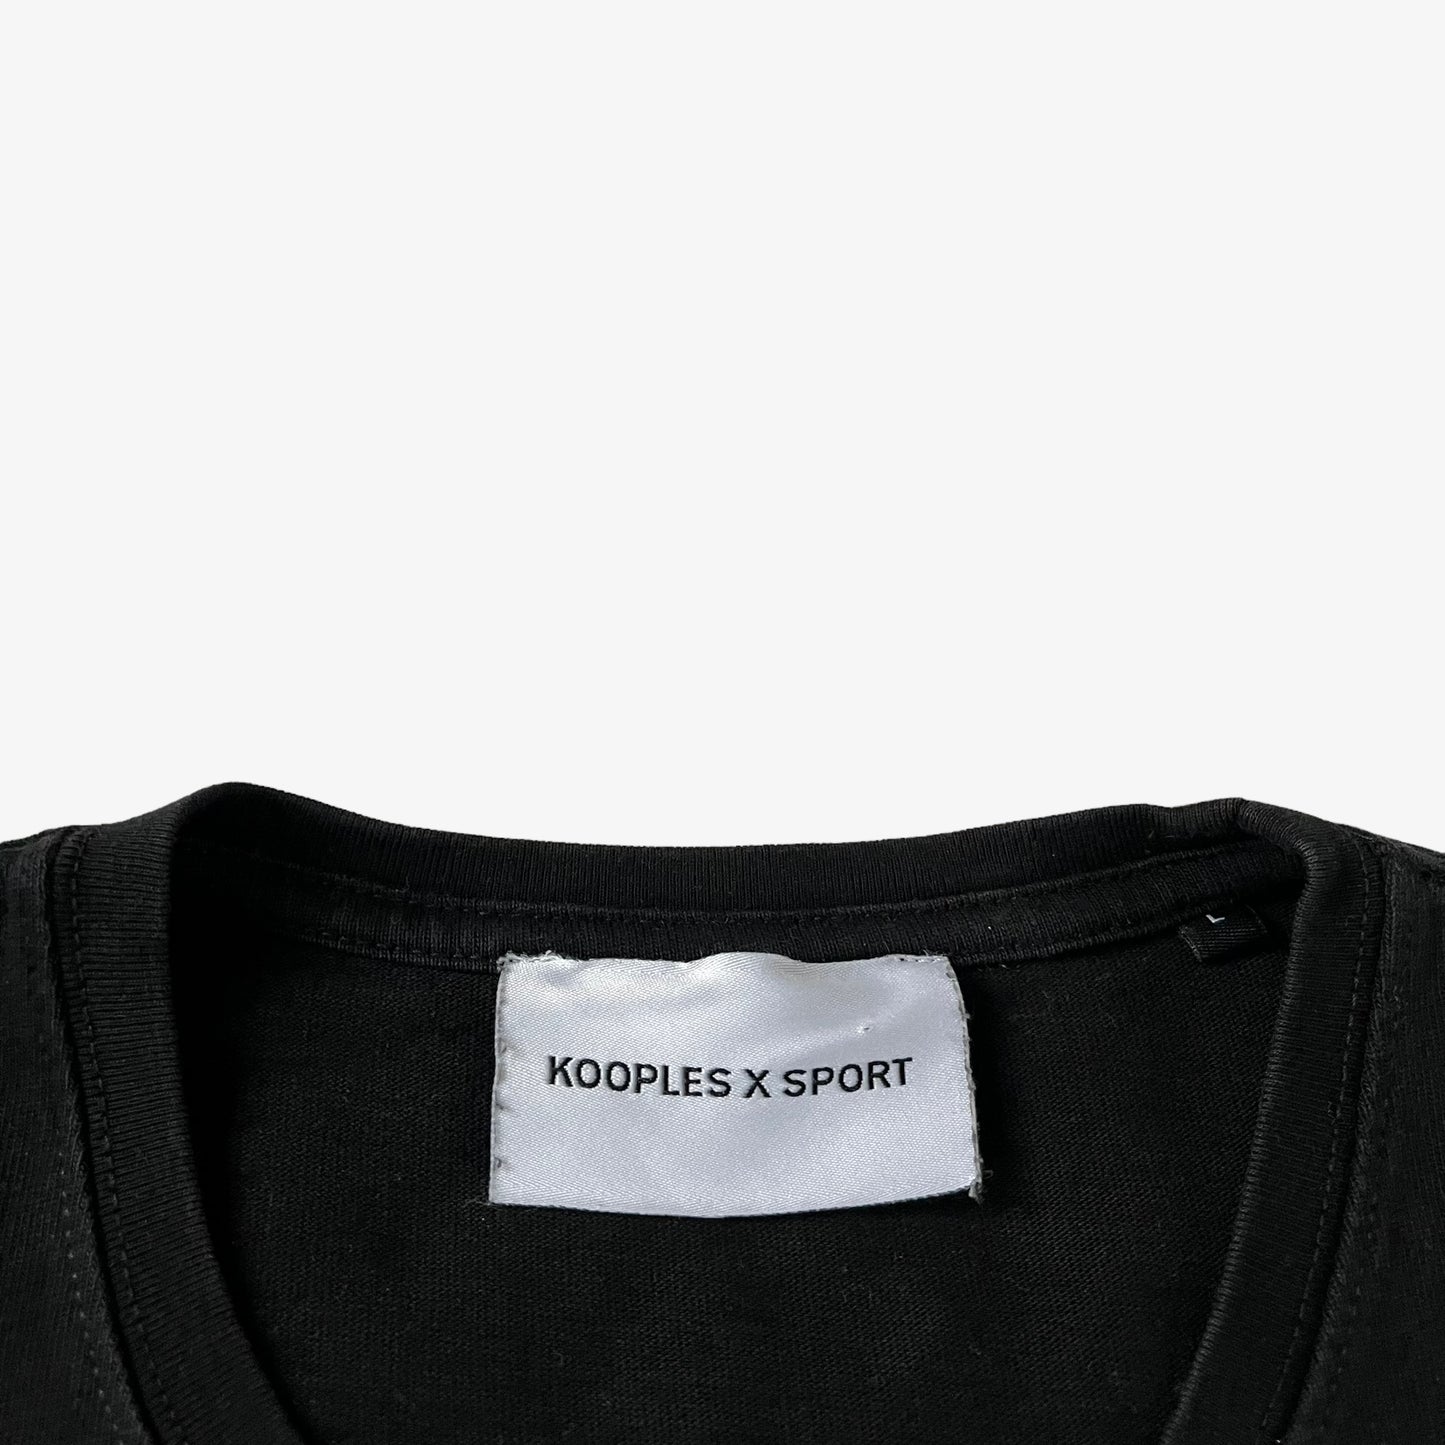 The Kooples x Sport Spell Out Top Label - Casspios Dream Vintage